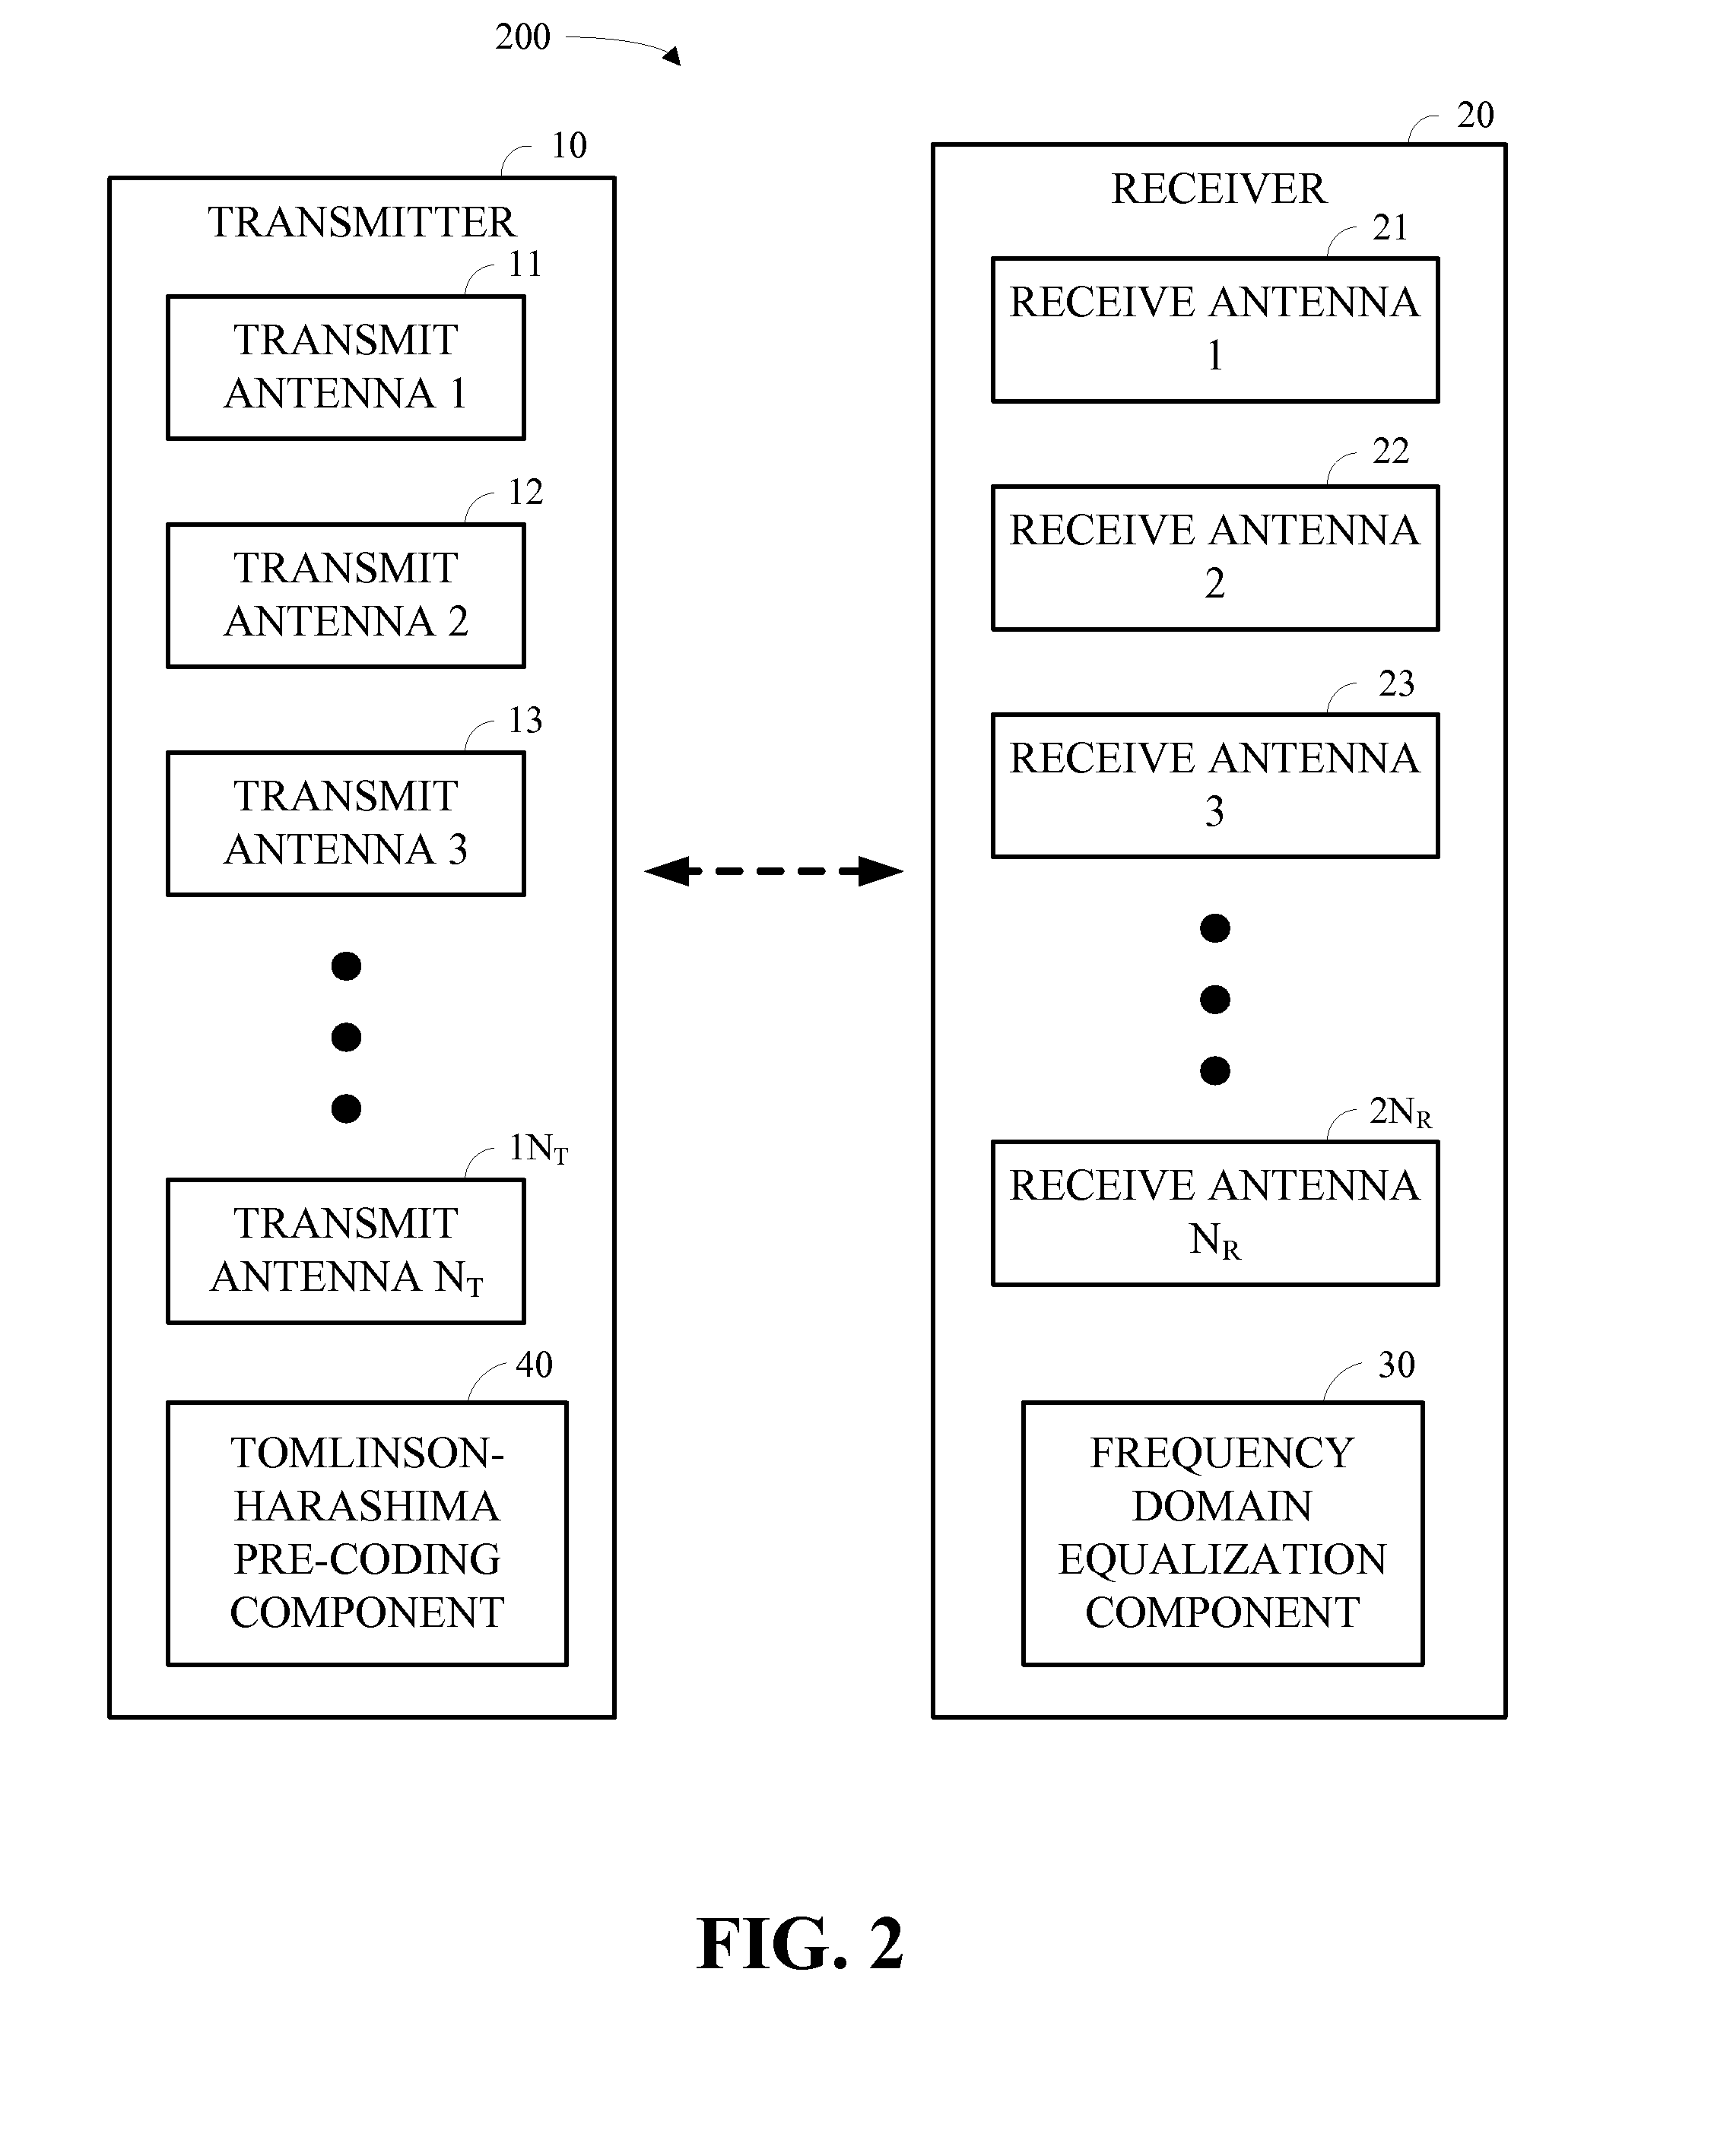 Frequency domain equalization with transmit precoding for high speed data transmission